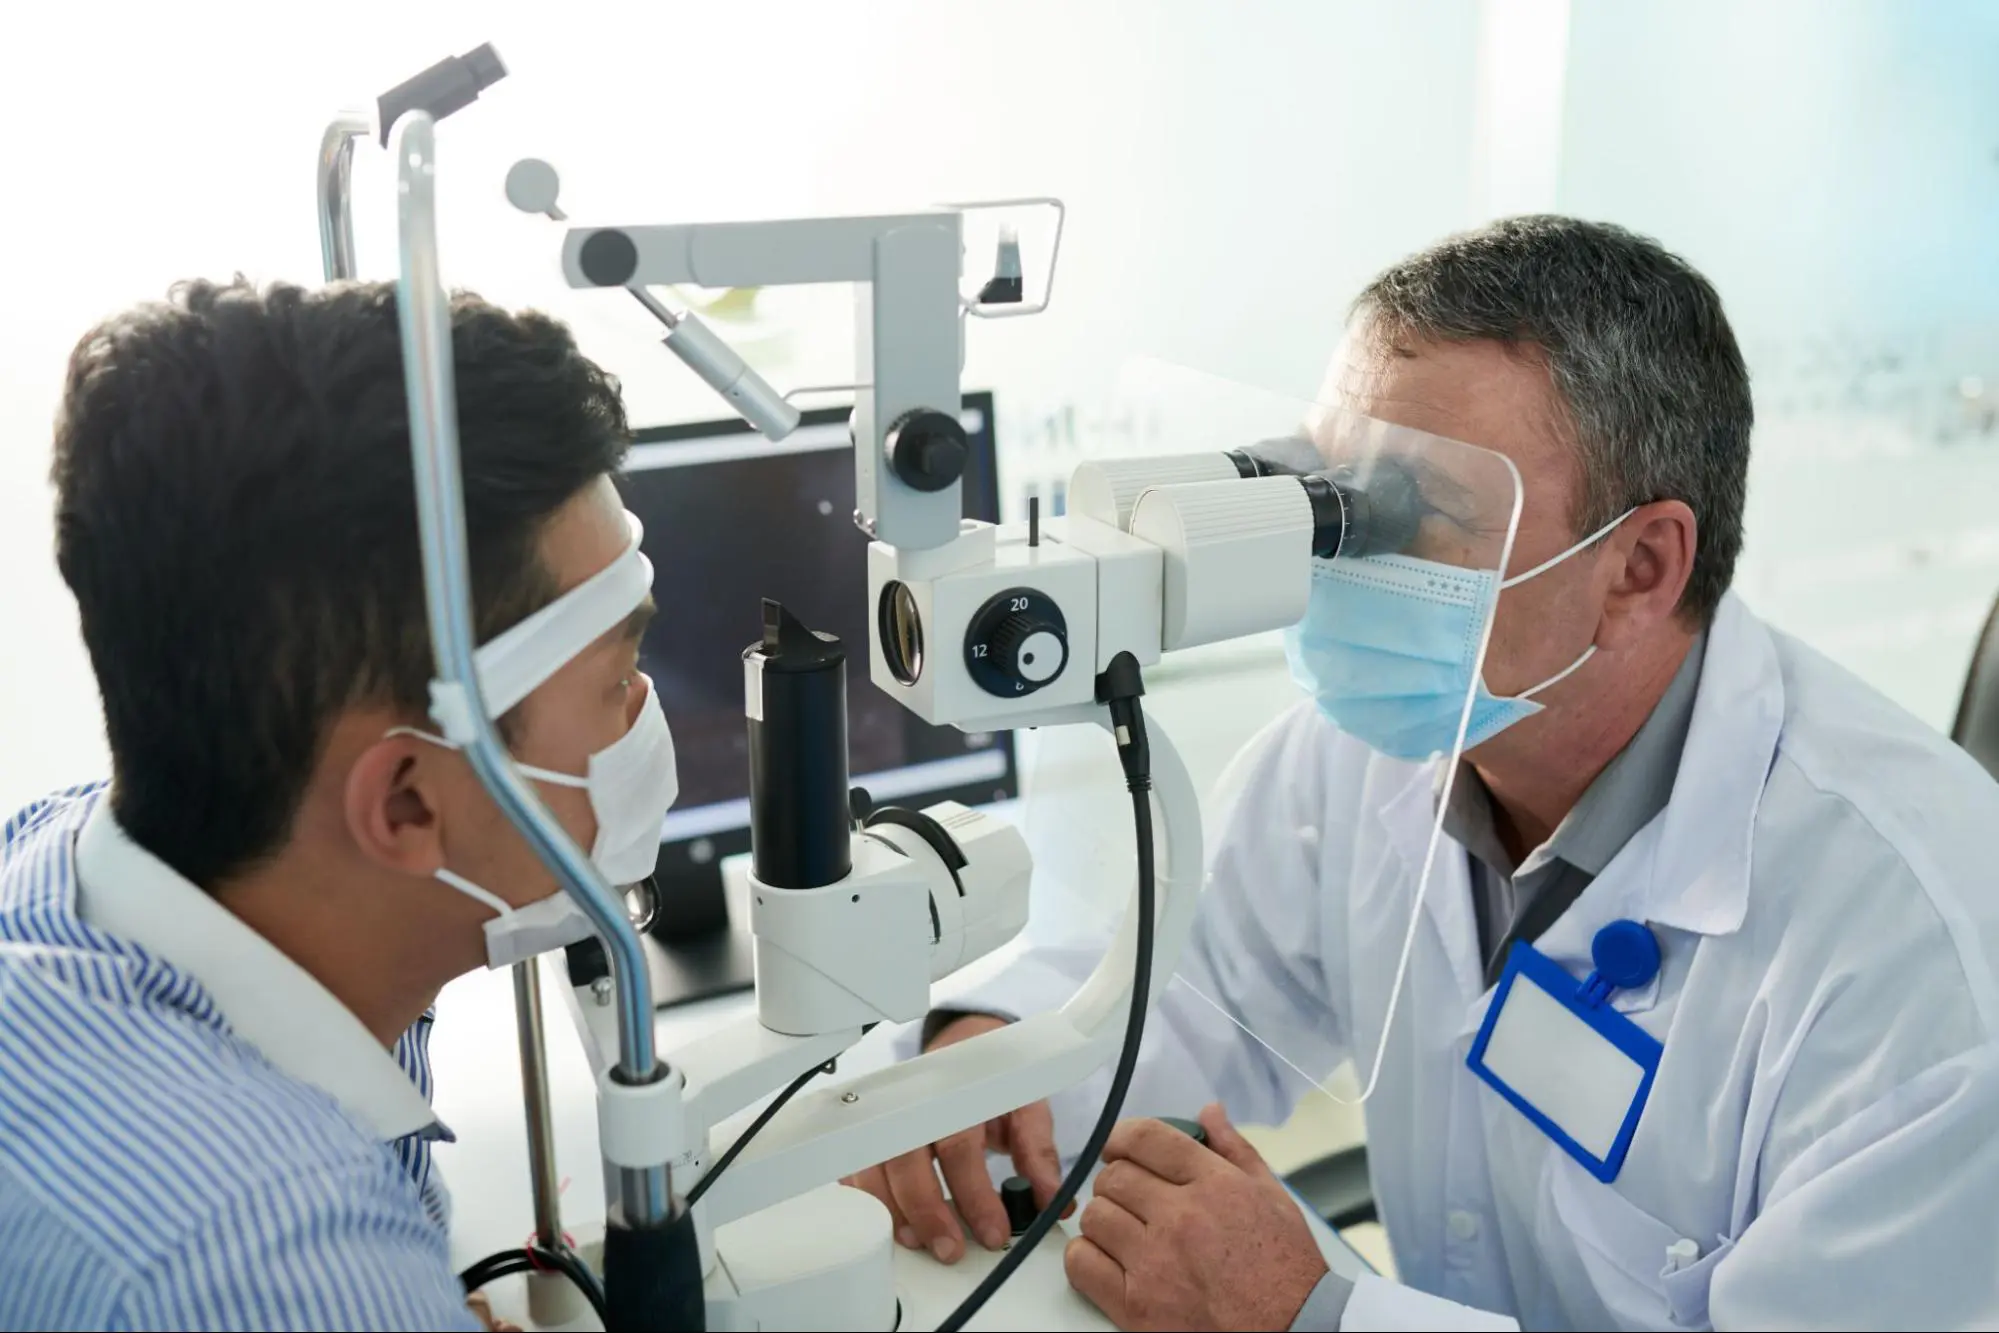 Know About Glaucoma & Glaucoma Treatments in Singapore